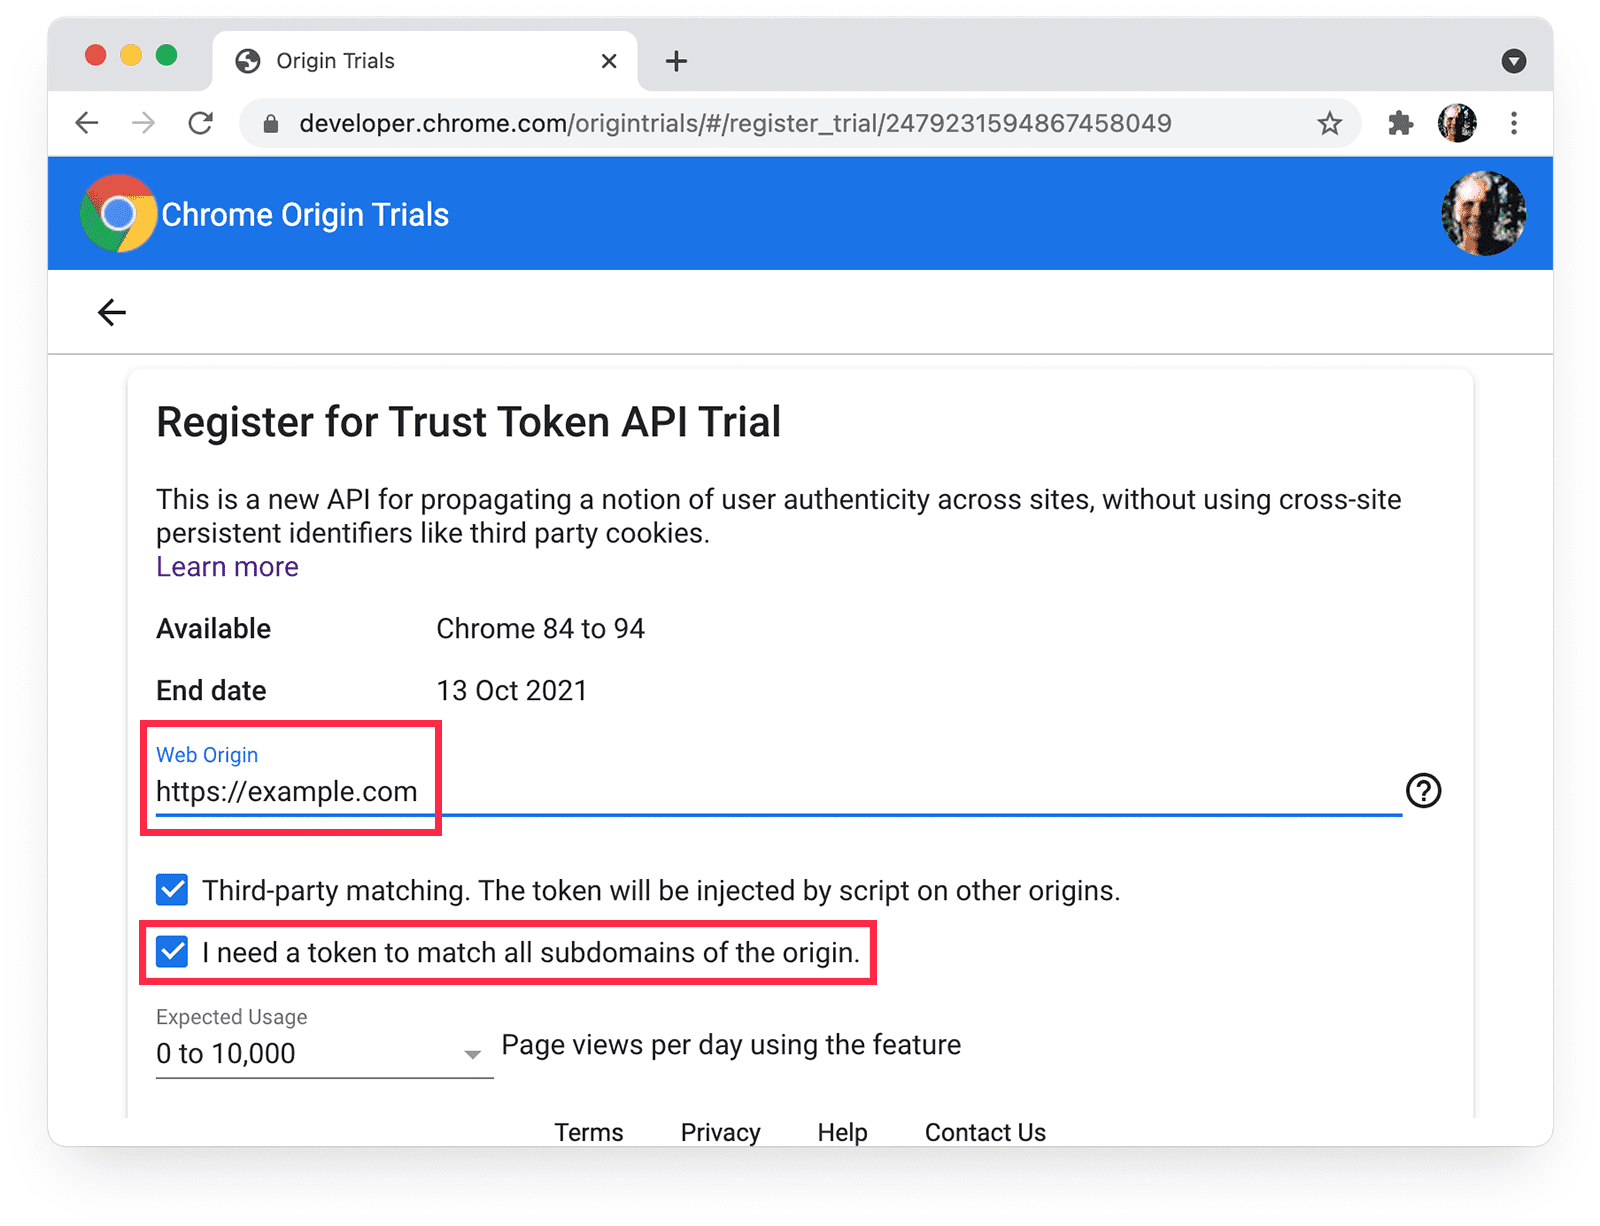 Chrome origin trials 
registration page showing subdomain-matching selected